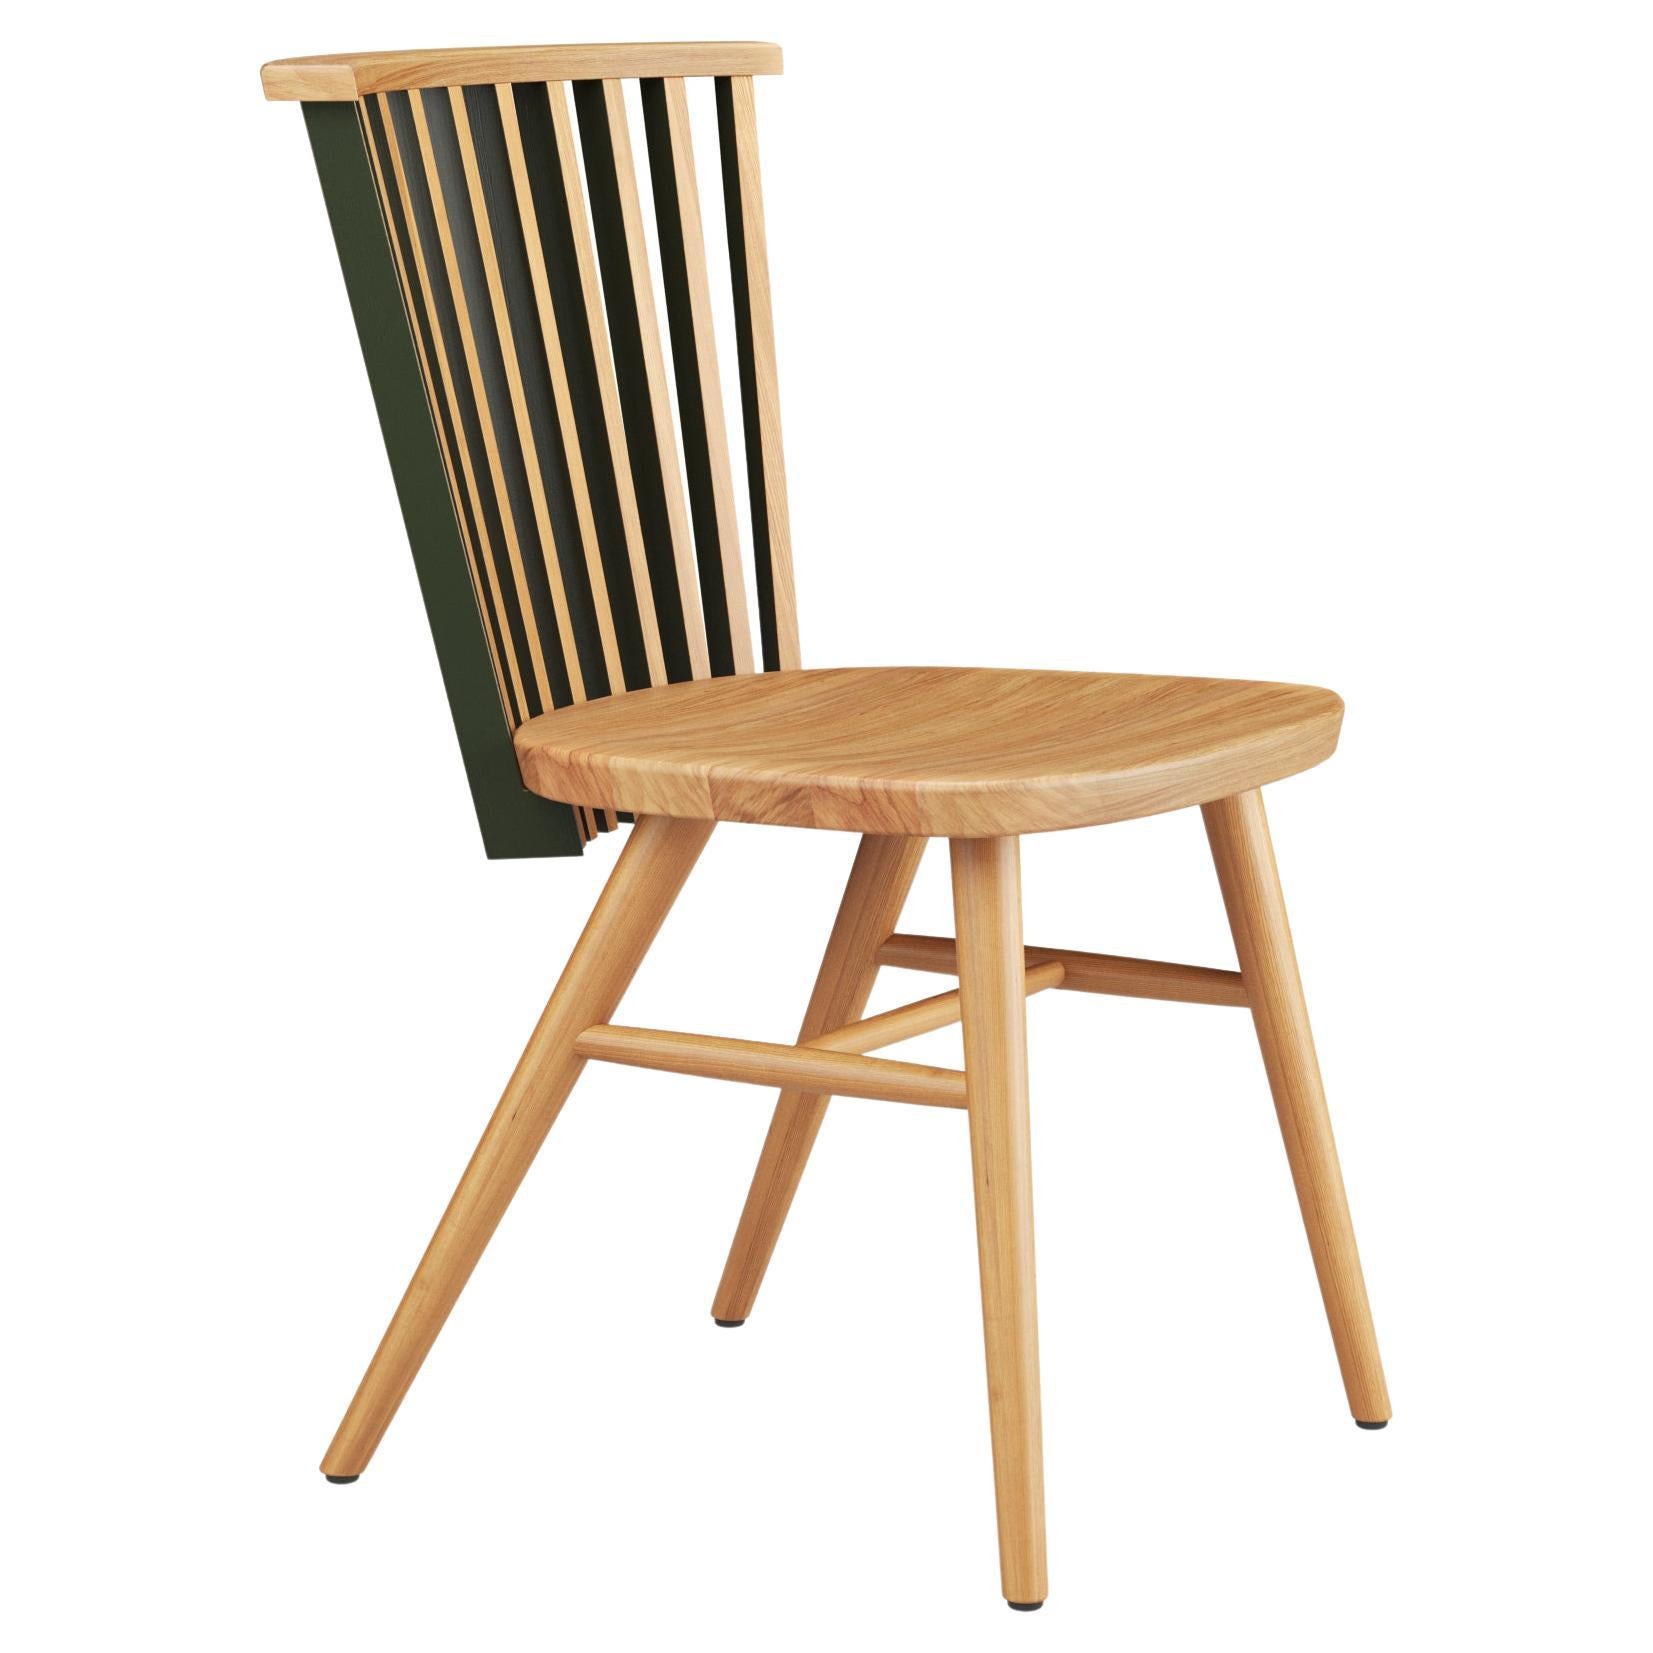 Hayche, Tornasol chair, Oak, Green & Pink, Solid Wood, UK, Made To Order